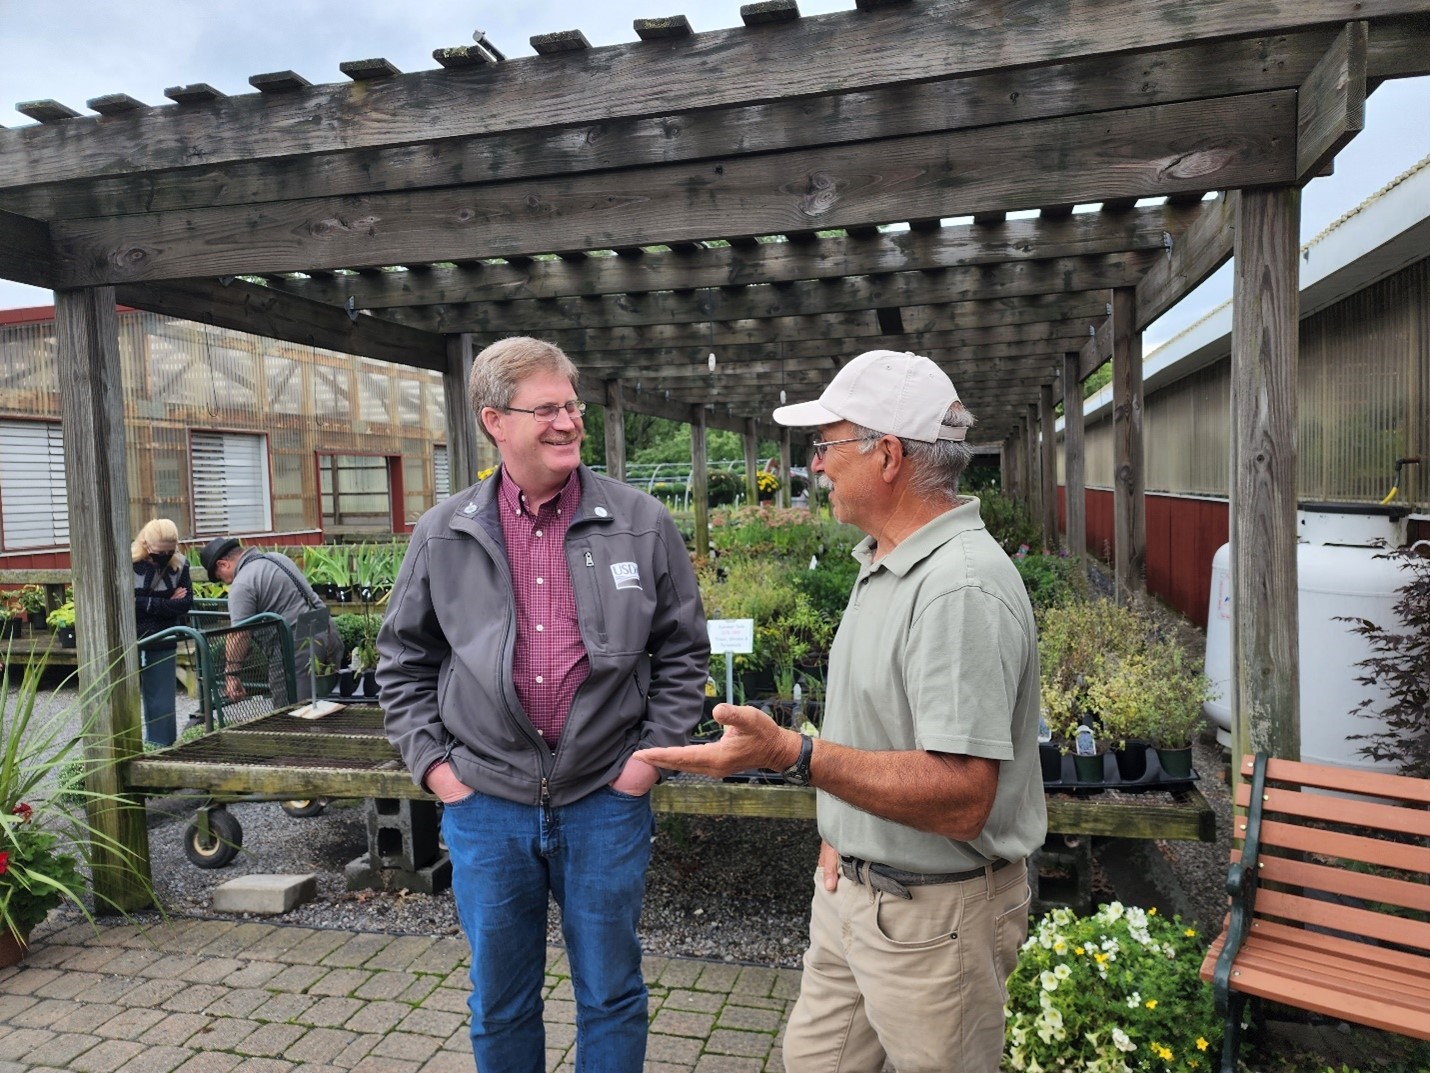 USDA Rural Development New York State Director Brian Murray standing with Peter Ferrante of Wallkill View Farm